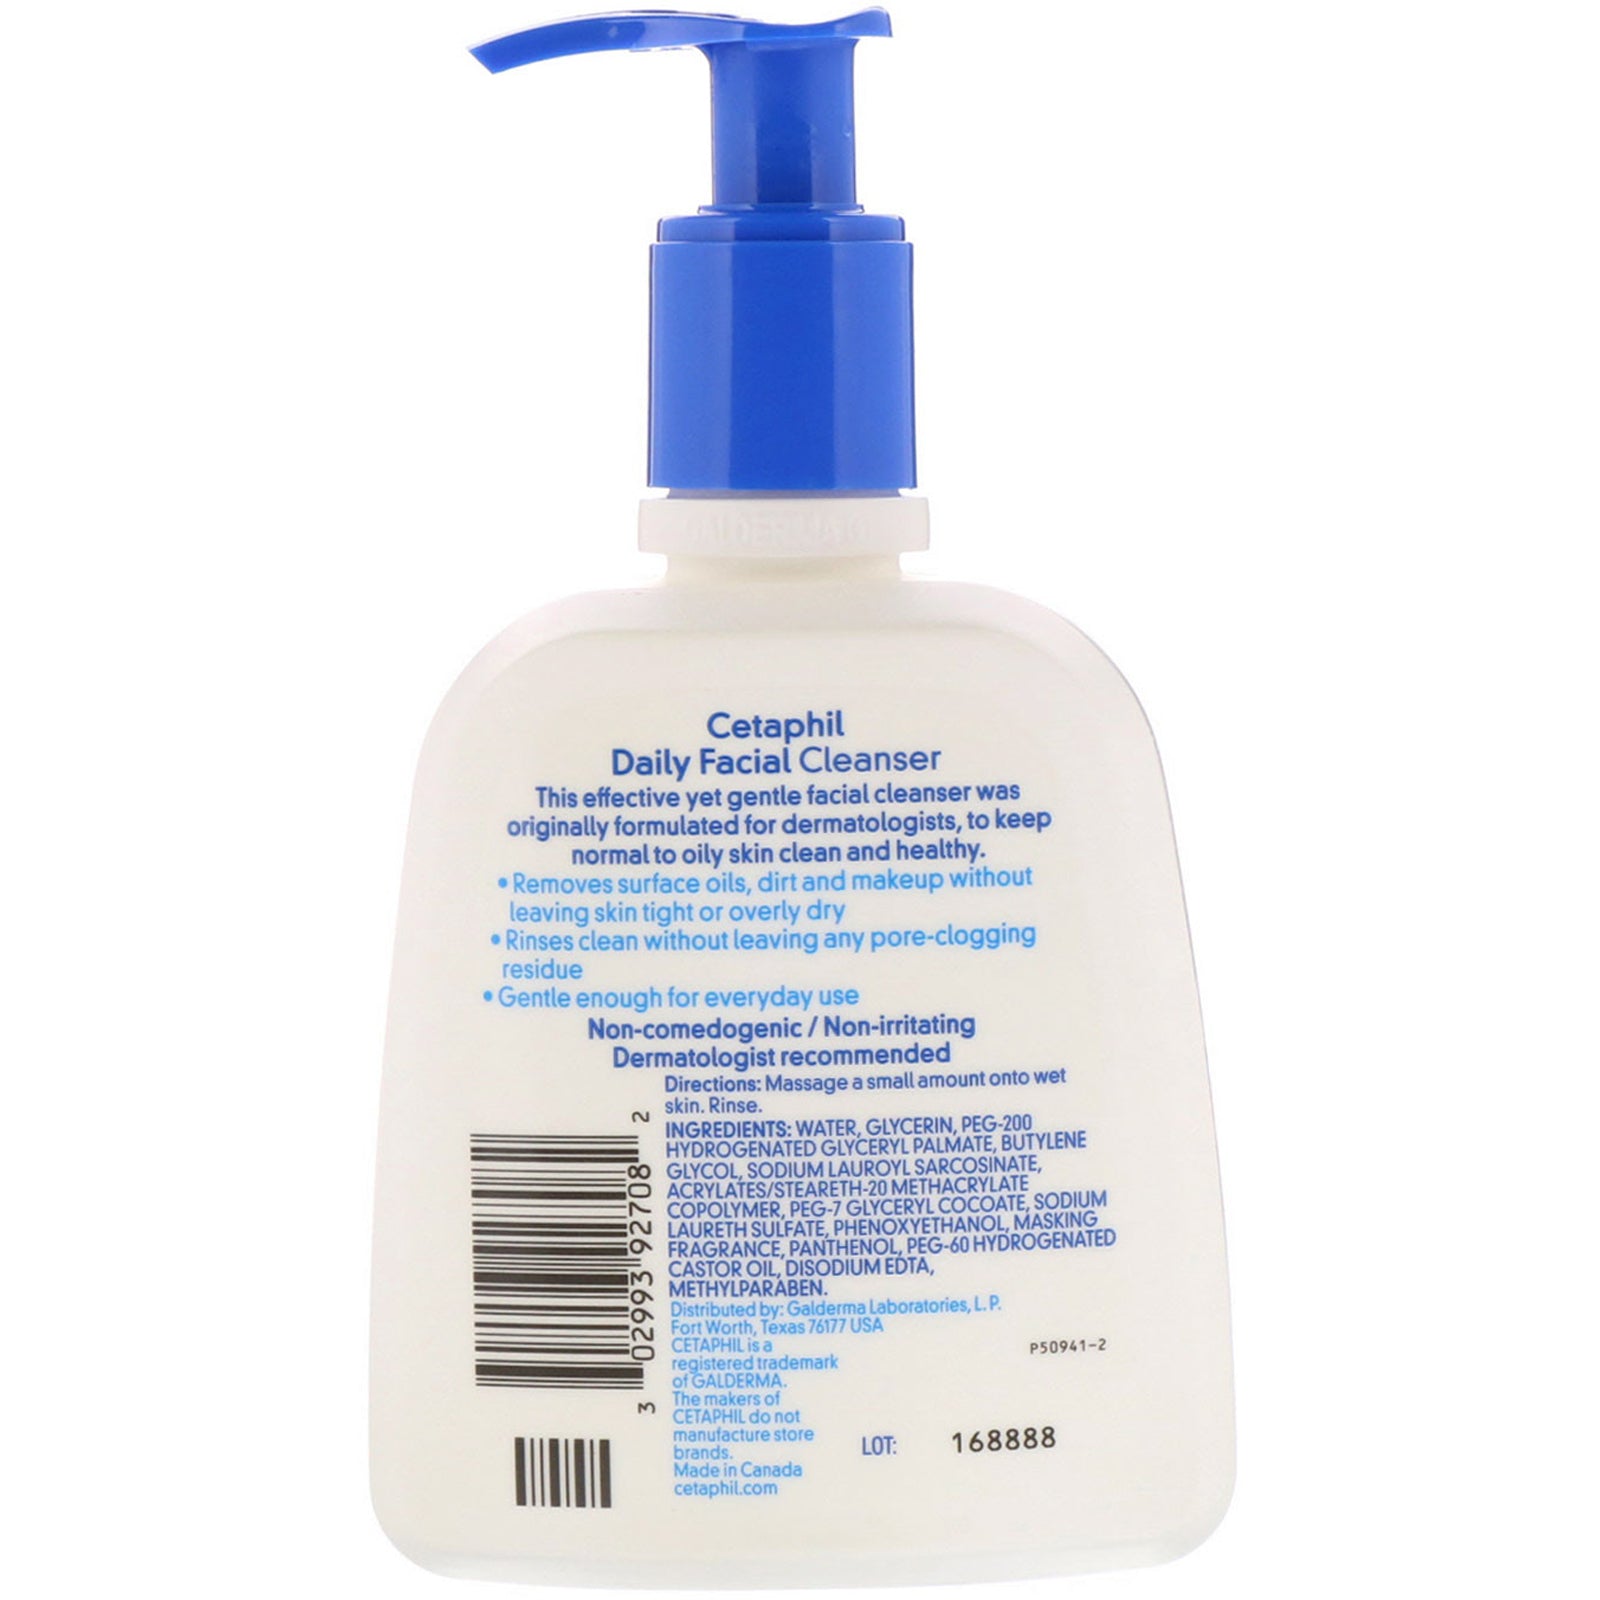 Cetaphil Daily Facial Cleanser, Face Wash For Normal to Oily Skin, 8 Oz